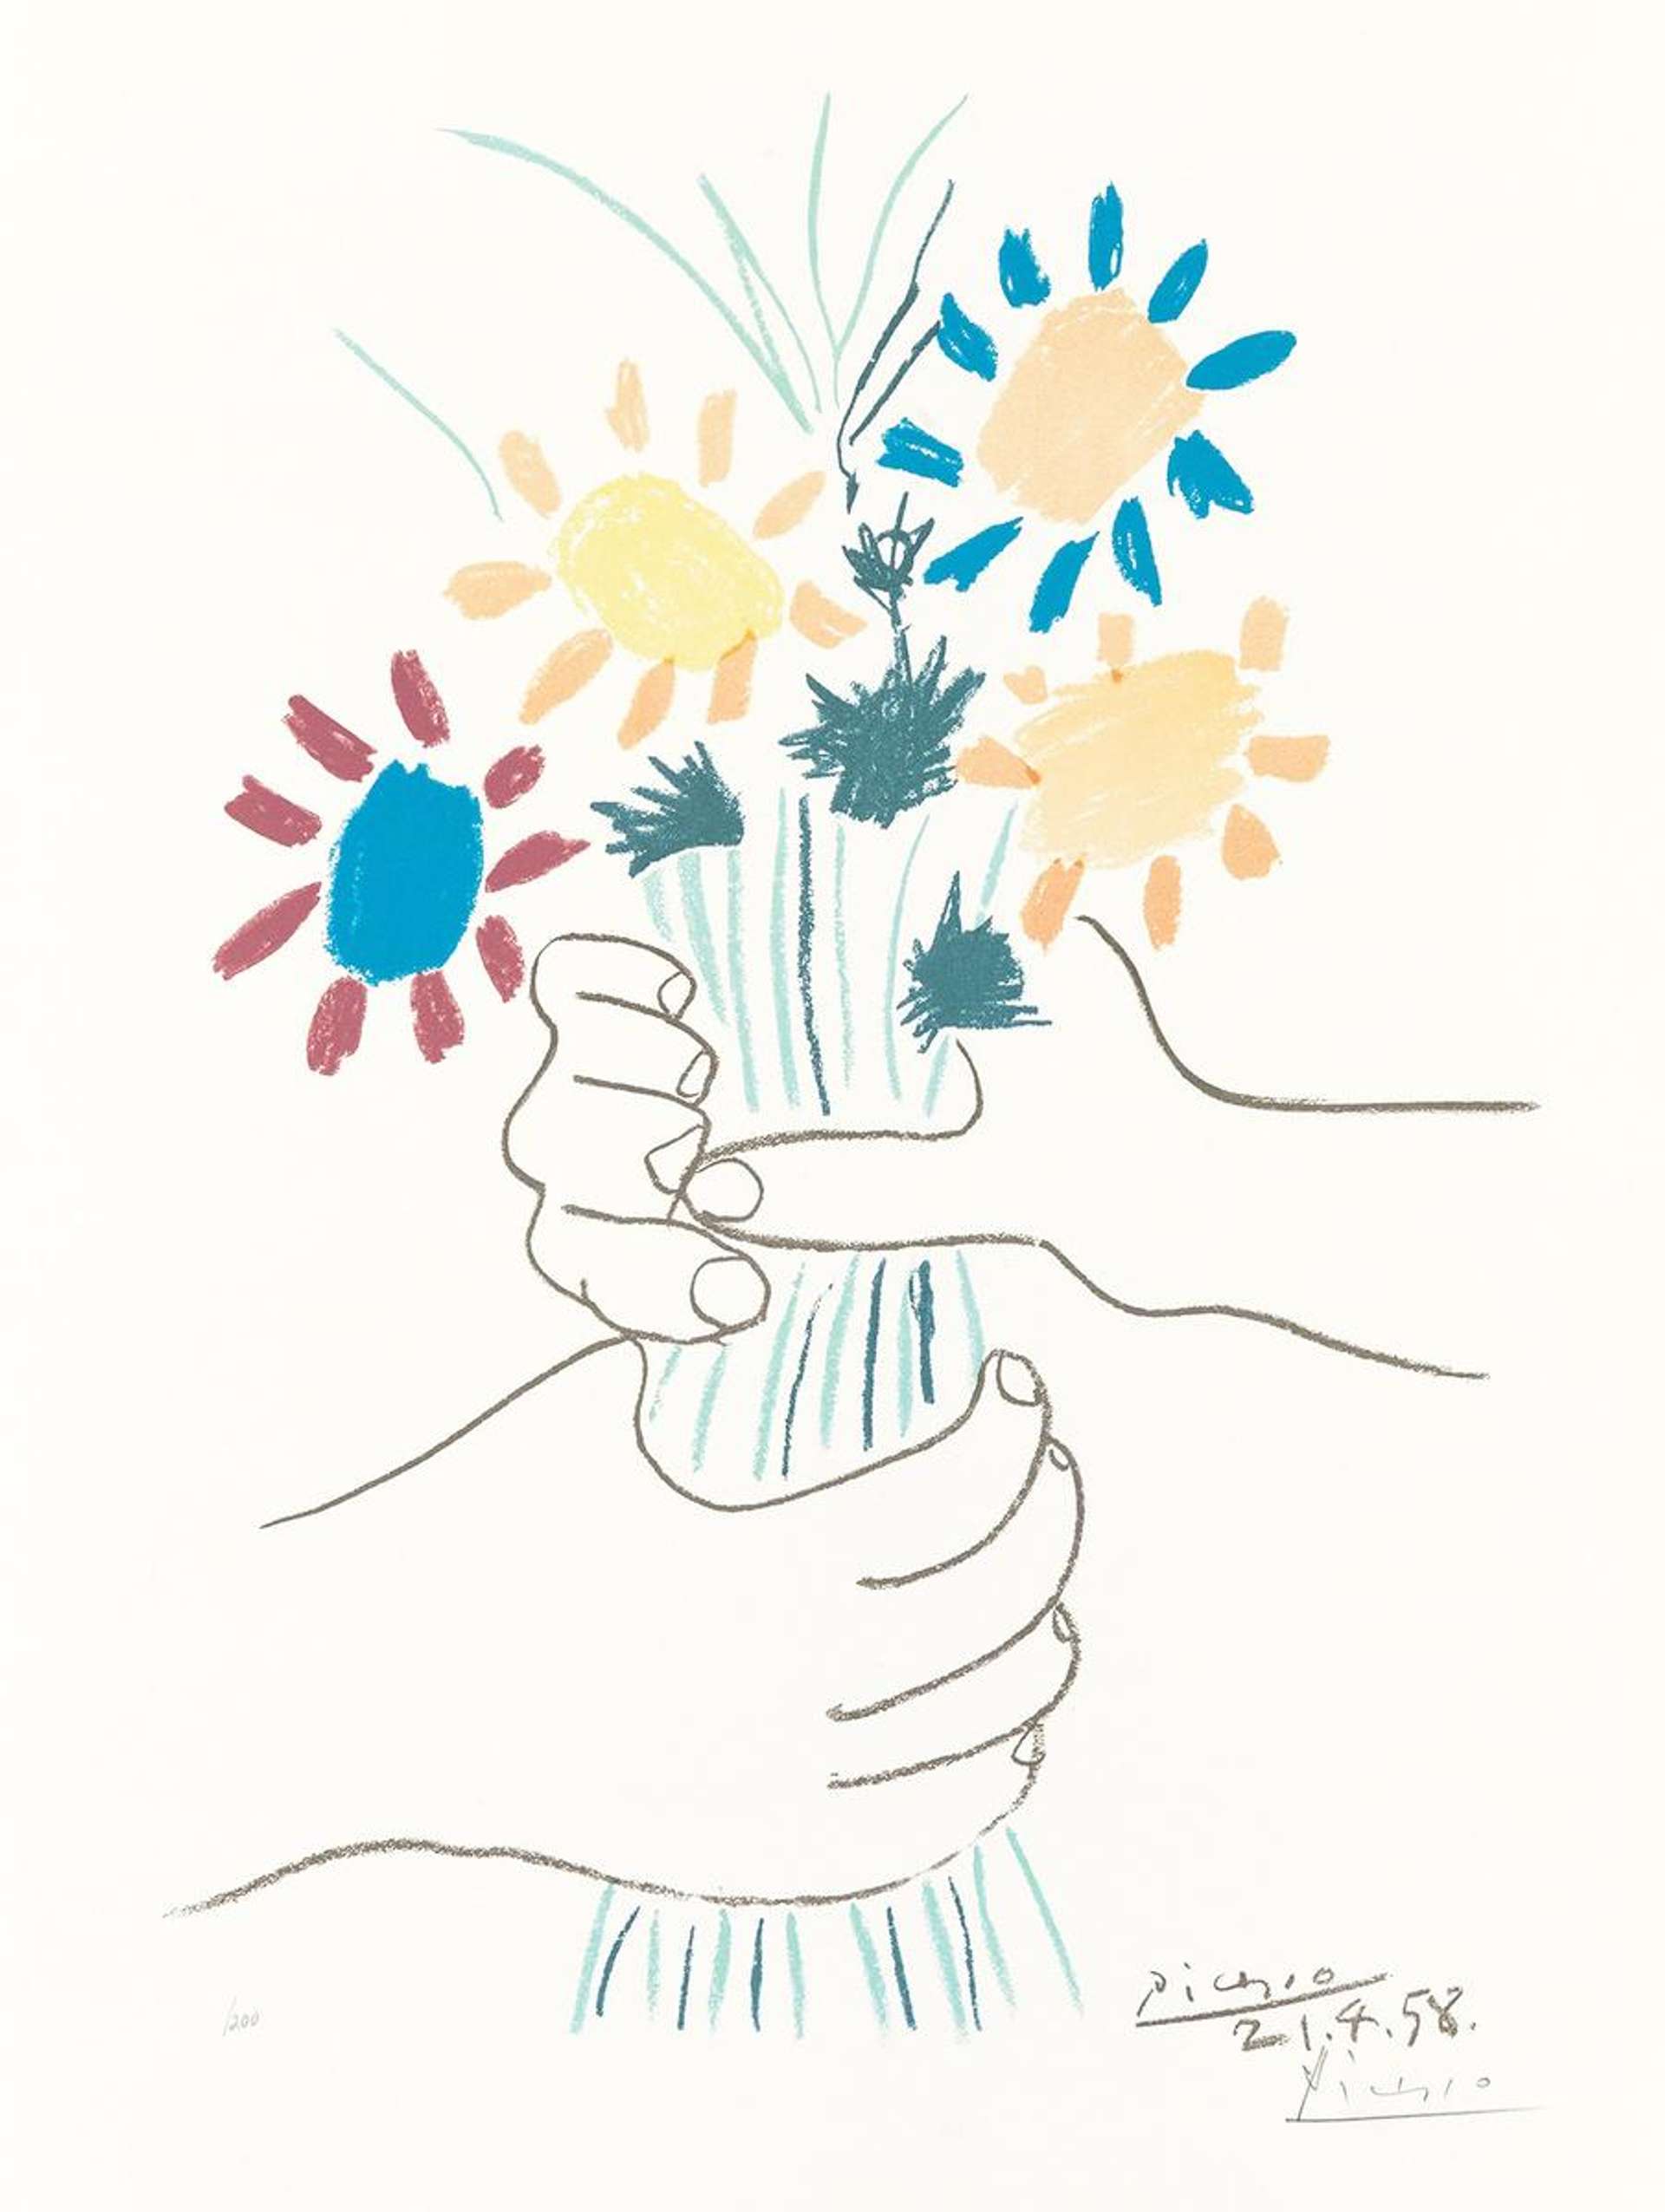 An image of a drawing by Pablo Picasso. Two disembodied hands exchange a colourful flower bouquet.